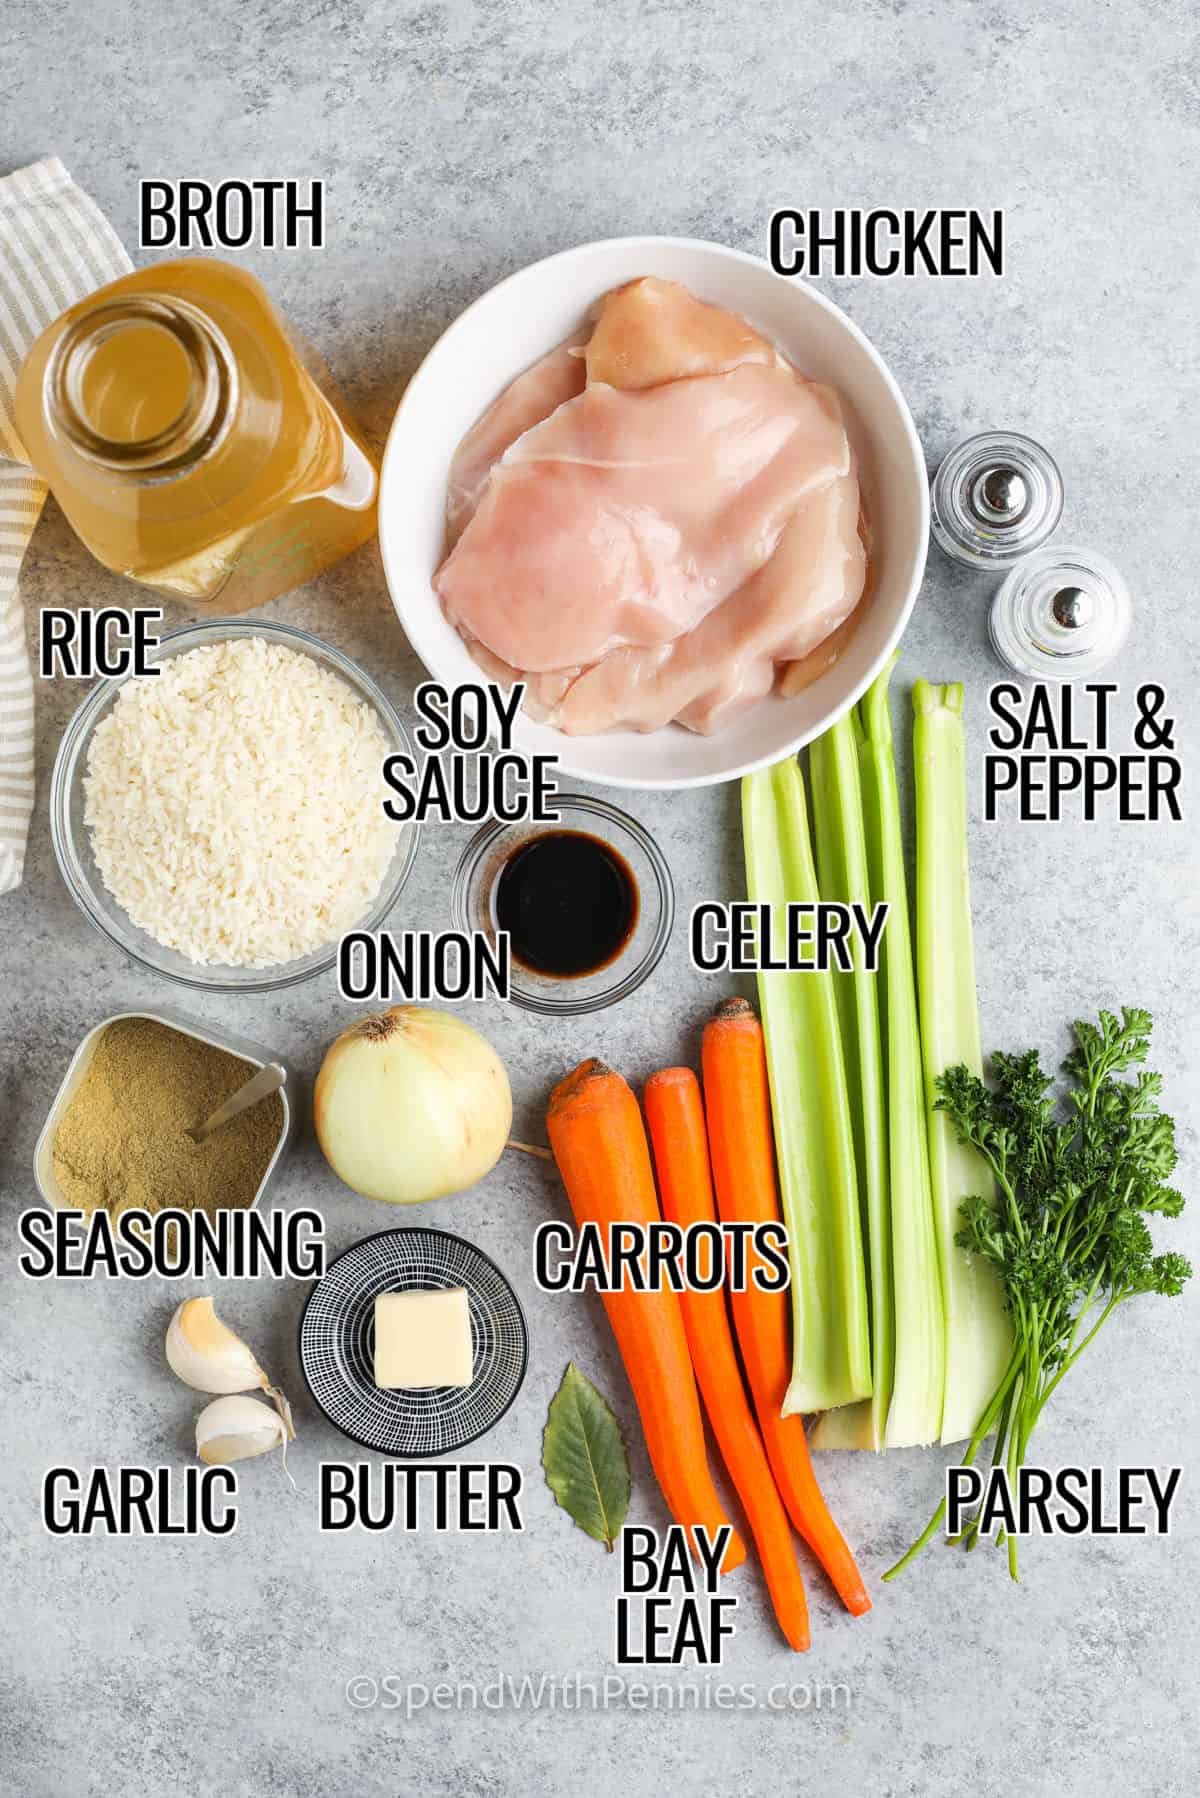 broth , chicken , rice , soy sauce , onion , seasoning , garlic , butter , bay leaf , carrots , celery and parsley to make Crockpot Chicken and Rice Soup with labels